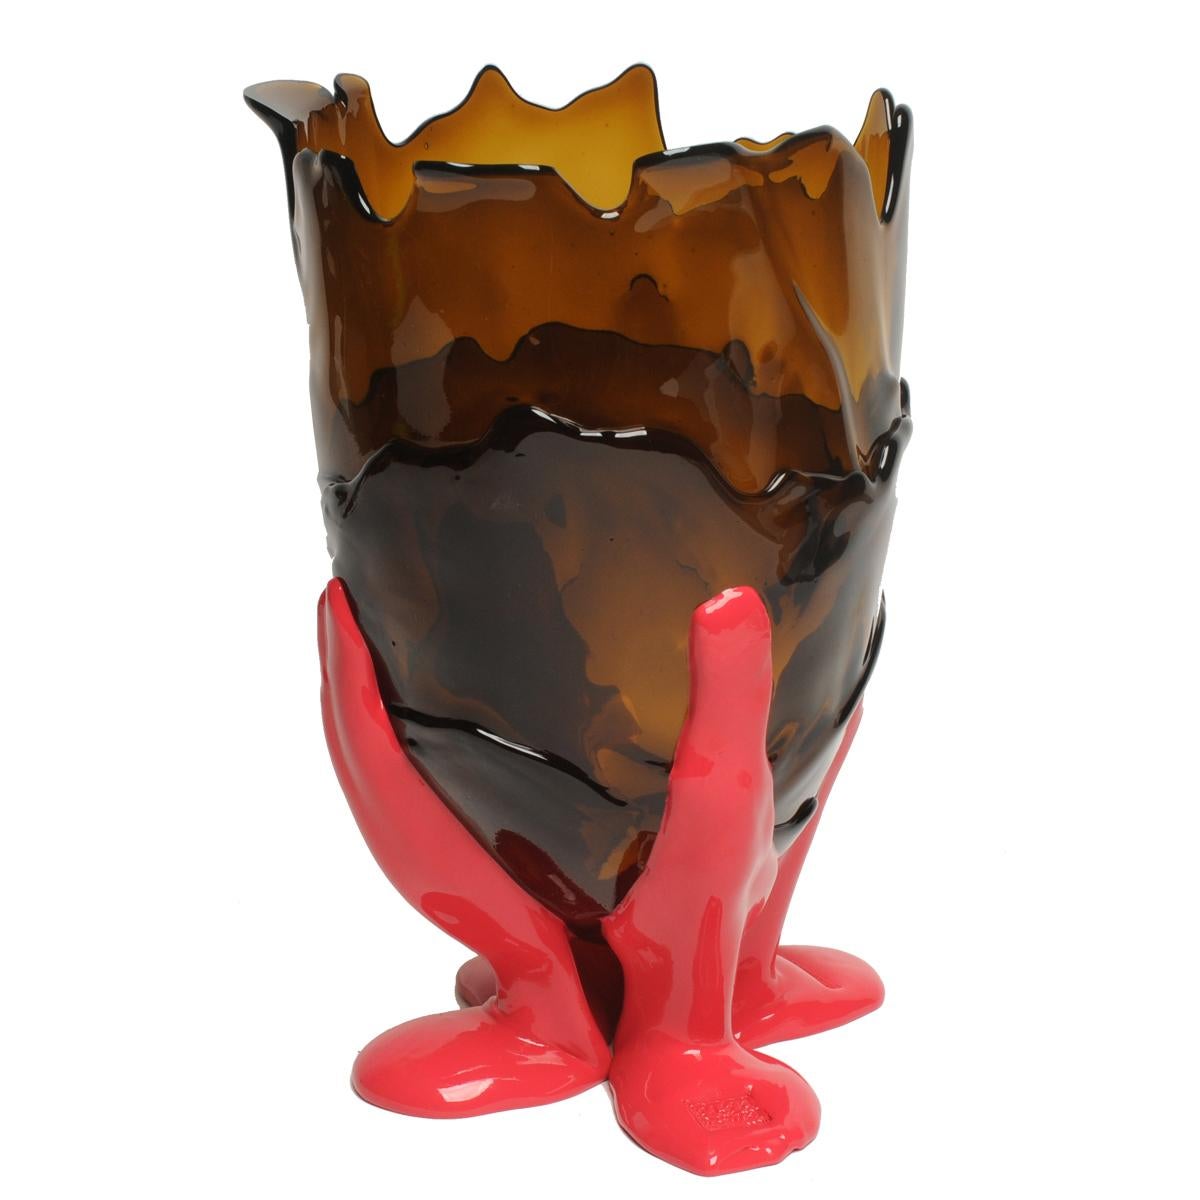 Clear extra colour vase - clear brown, matt fuchsia
Vase in soft resin designed by Gaetano Pesce in 1995 for Fish Design collection.

Measures: M - ø 16cm x H 26cm
Colours: clear brown, matt fuchsia
Other sizes available.
Vase in soft resin